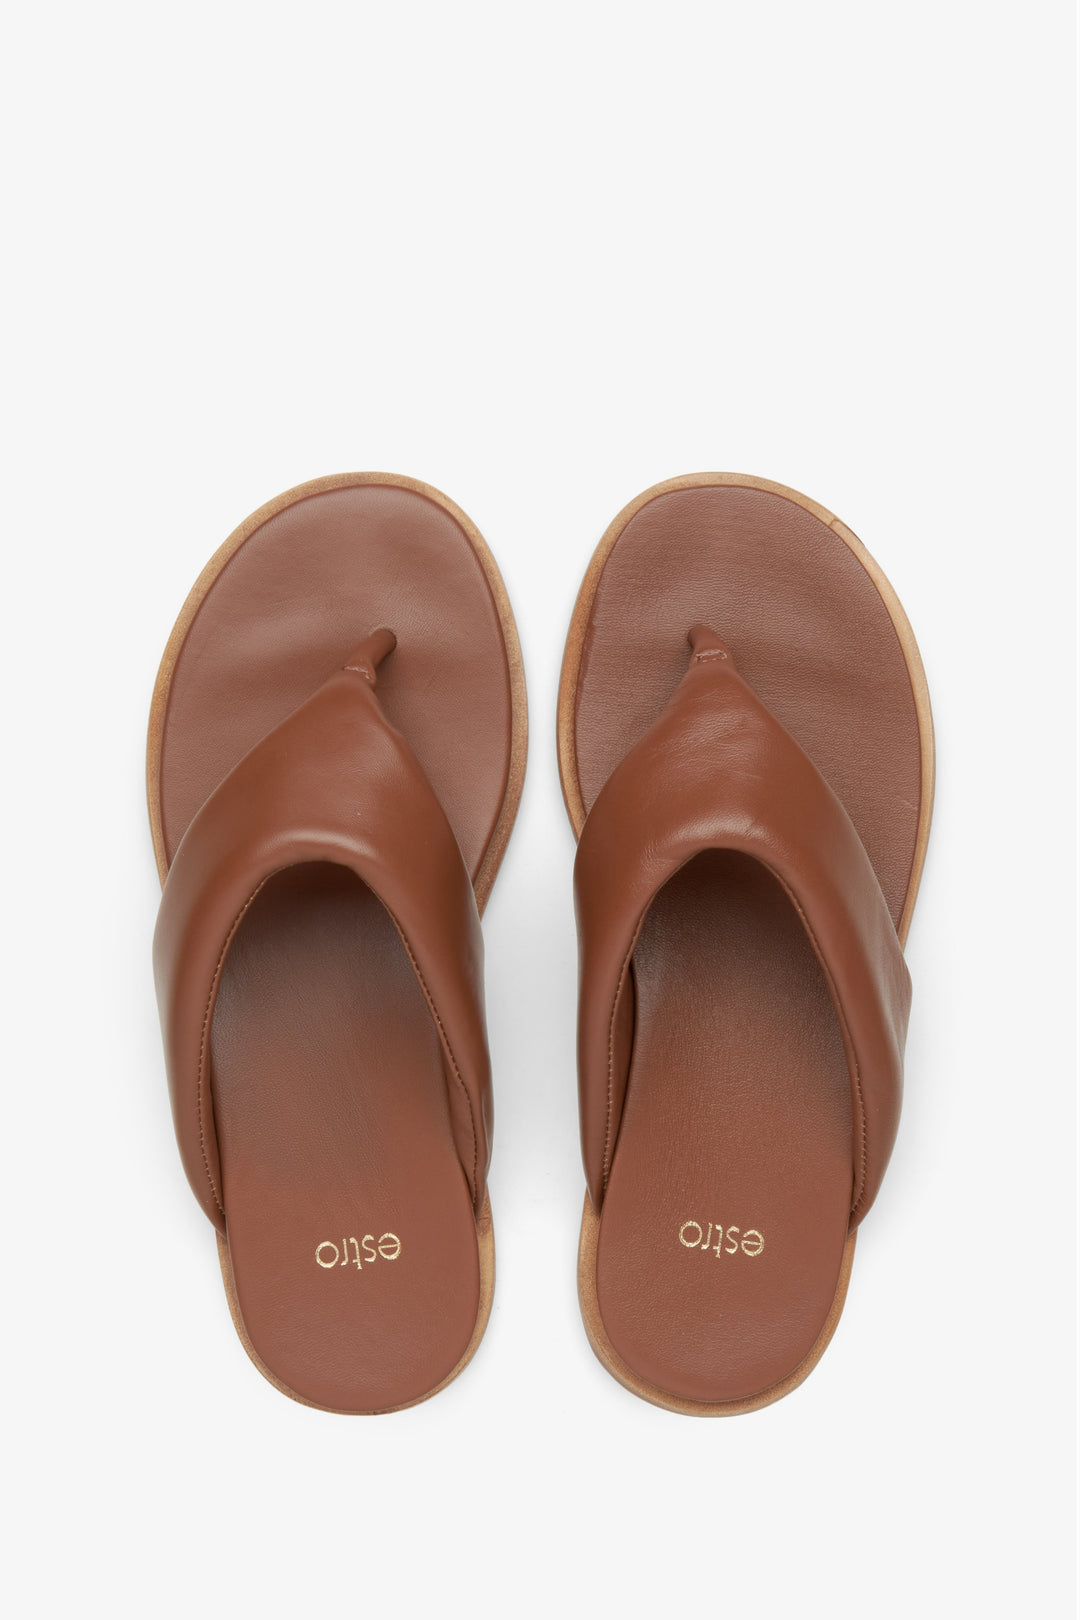 Women's brown leather thong slide sandals Estro - presentation from above.